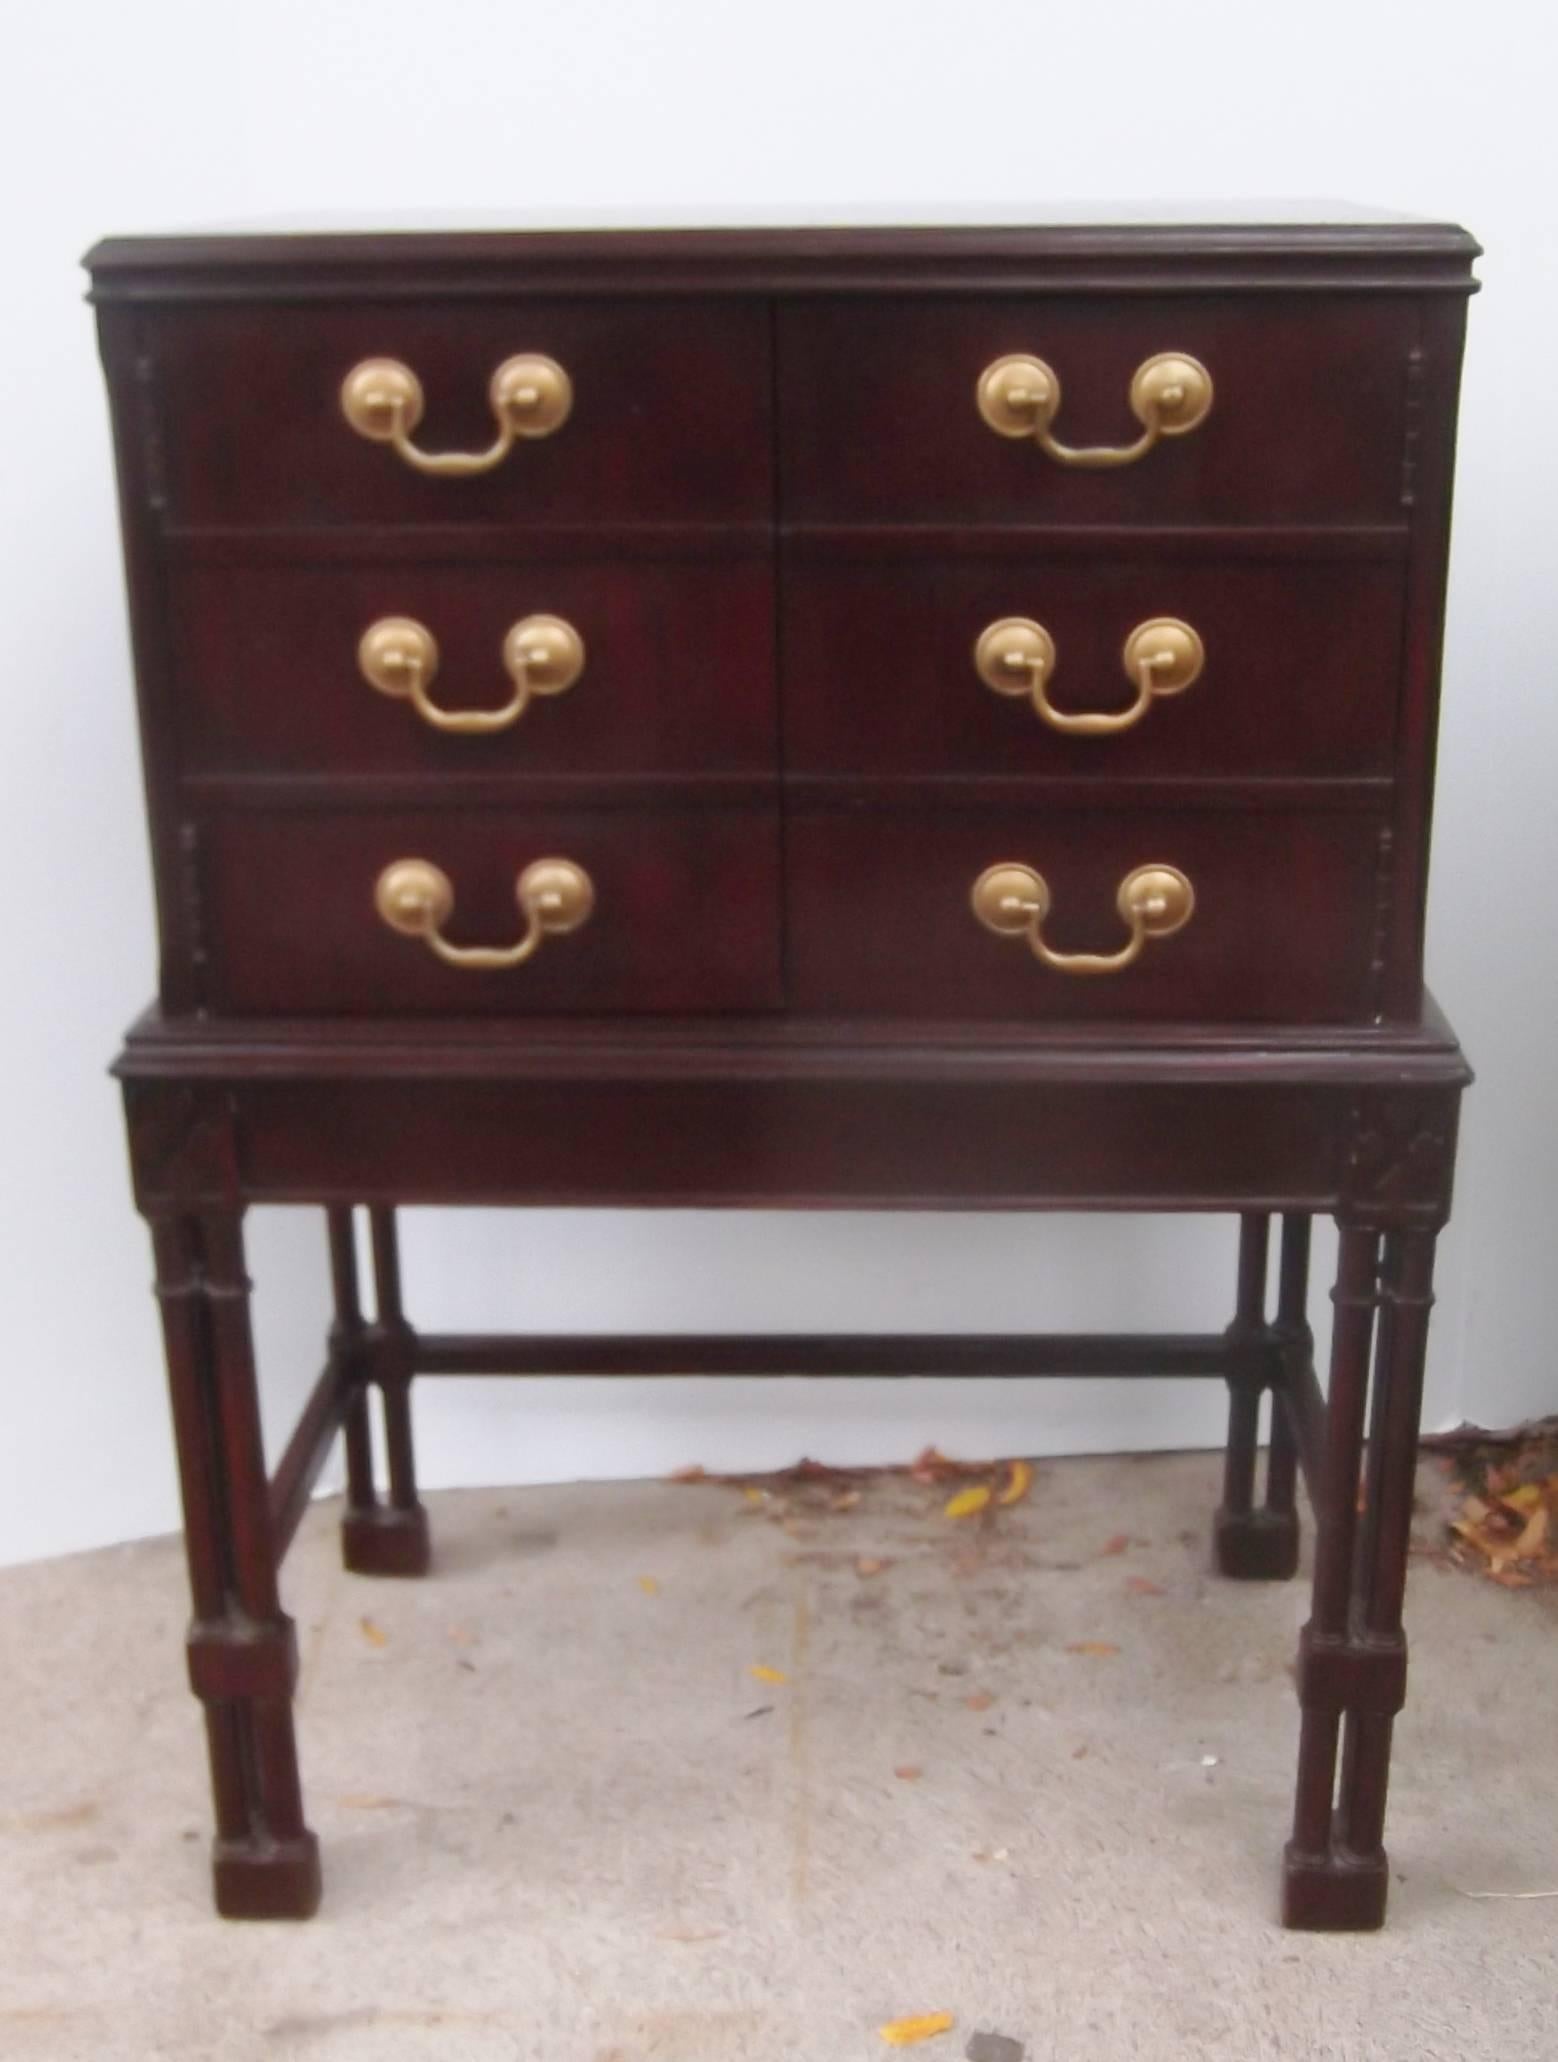 A mahogany chest on stand with faux drawers that reveal a storage compartment.
The Classic handles make the front appear as six small drawers but are actually two doors. The base is attached and the legs are I the Regency style. A perfect piece for